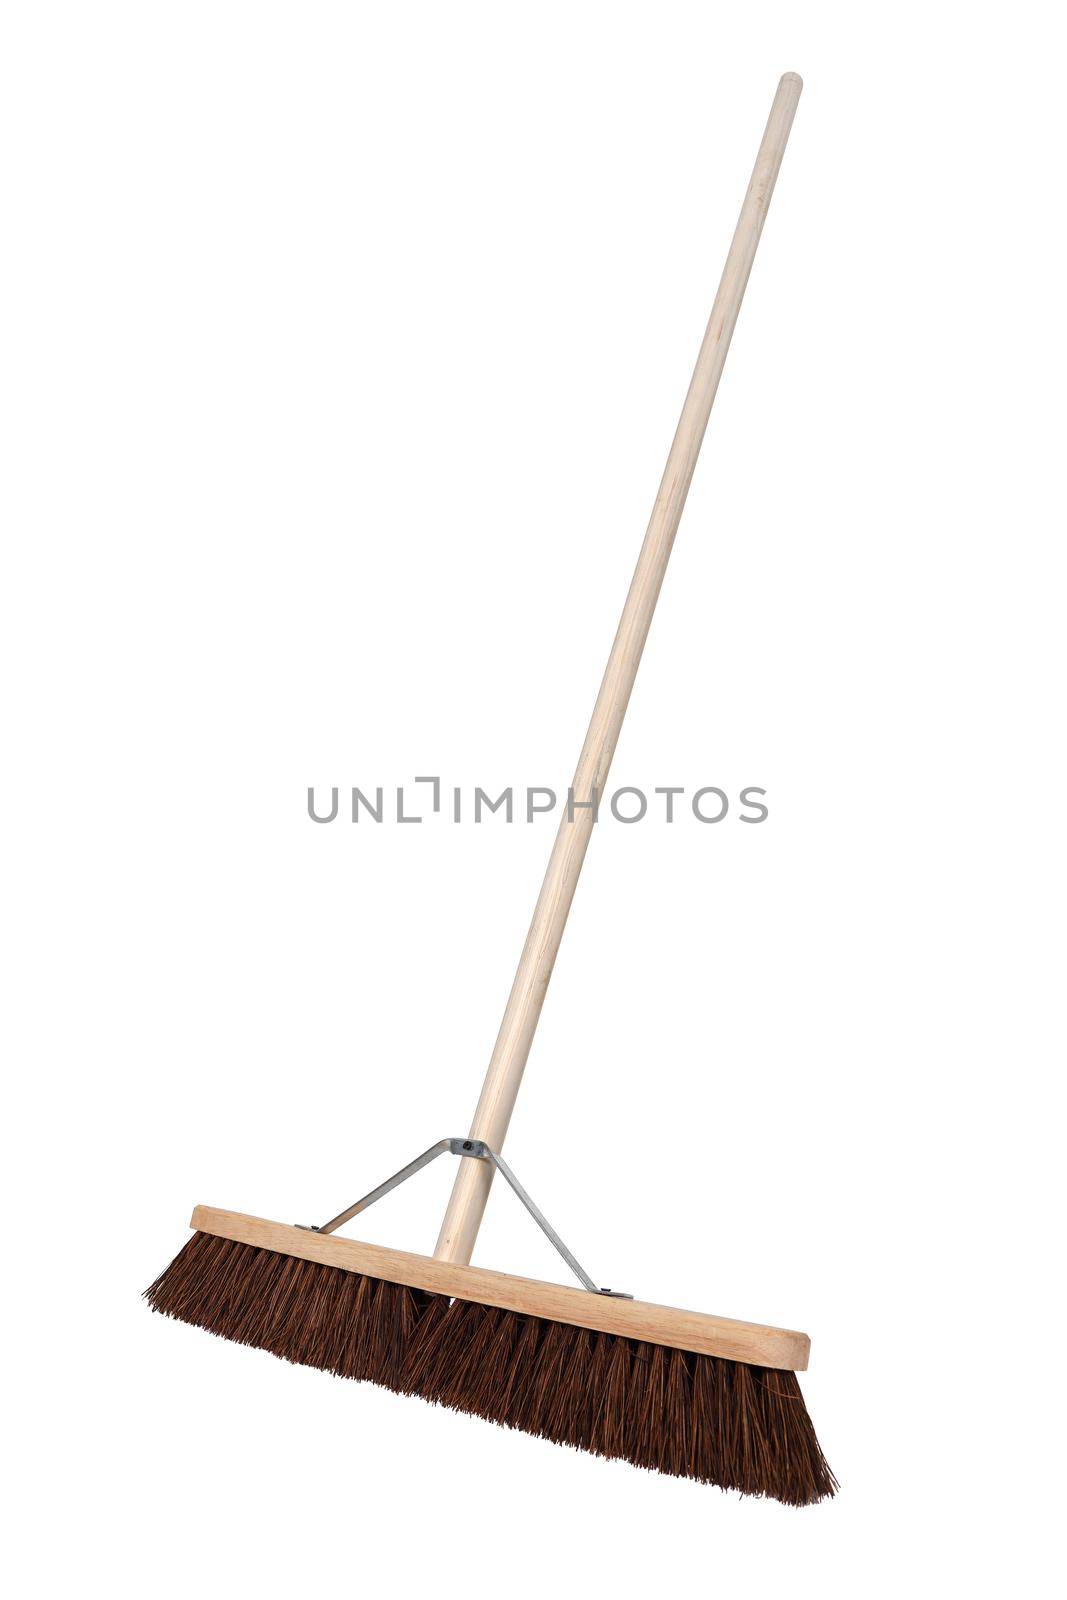 A side view of a yard broom on white background